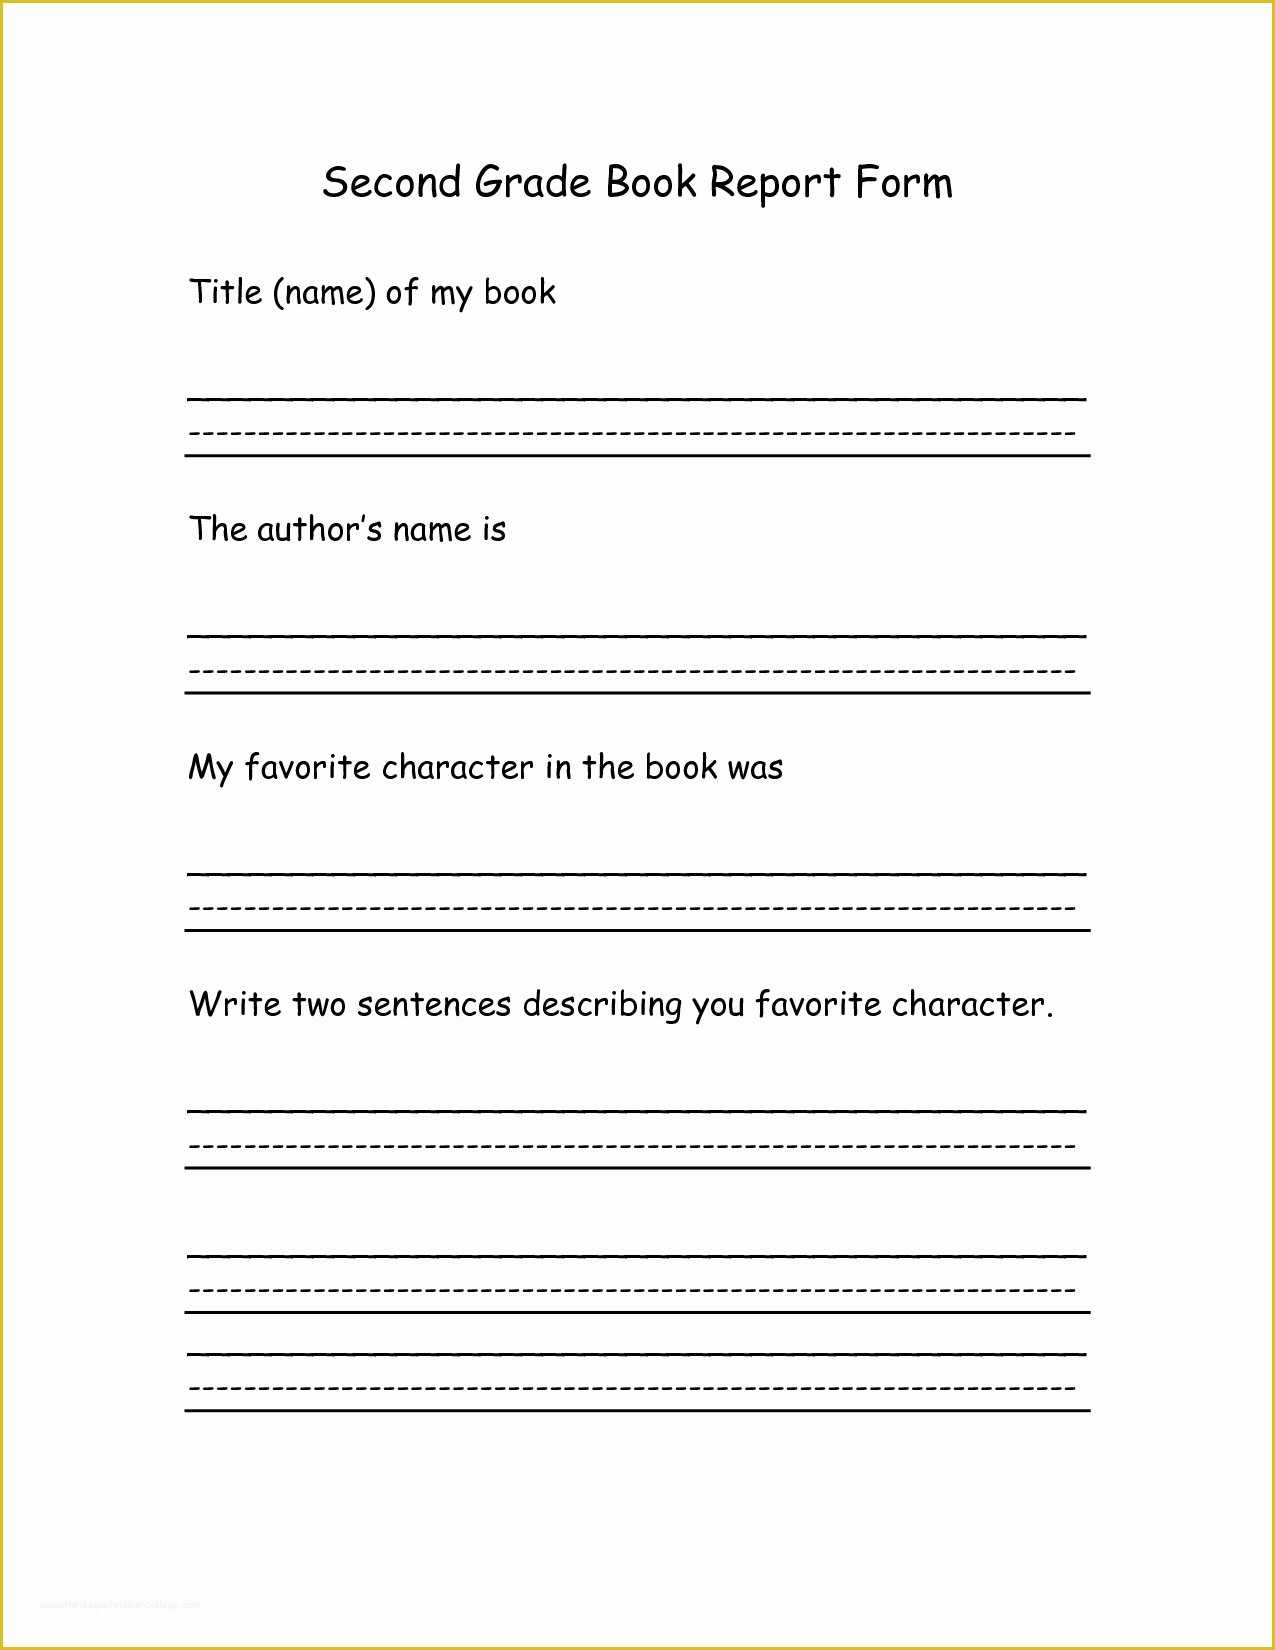 2nd Grade Book Report Template Free Of 8 Best Of 2nd Grade Book Report Printables 2nd